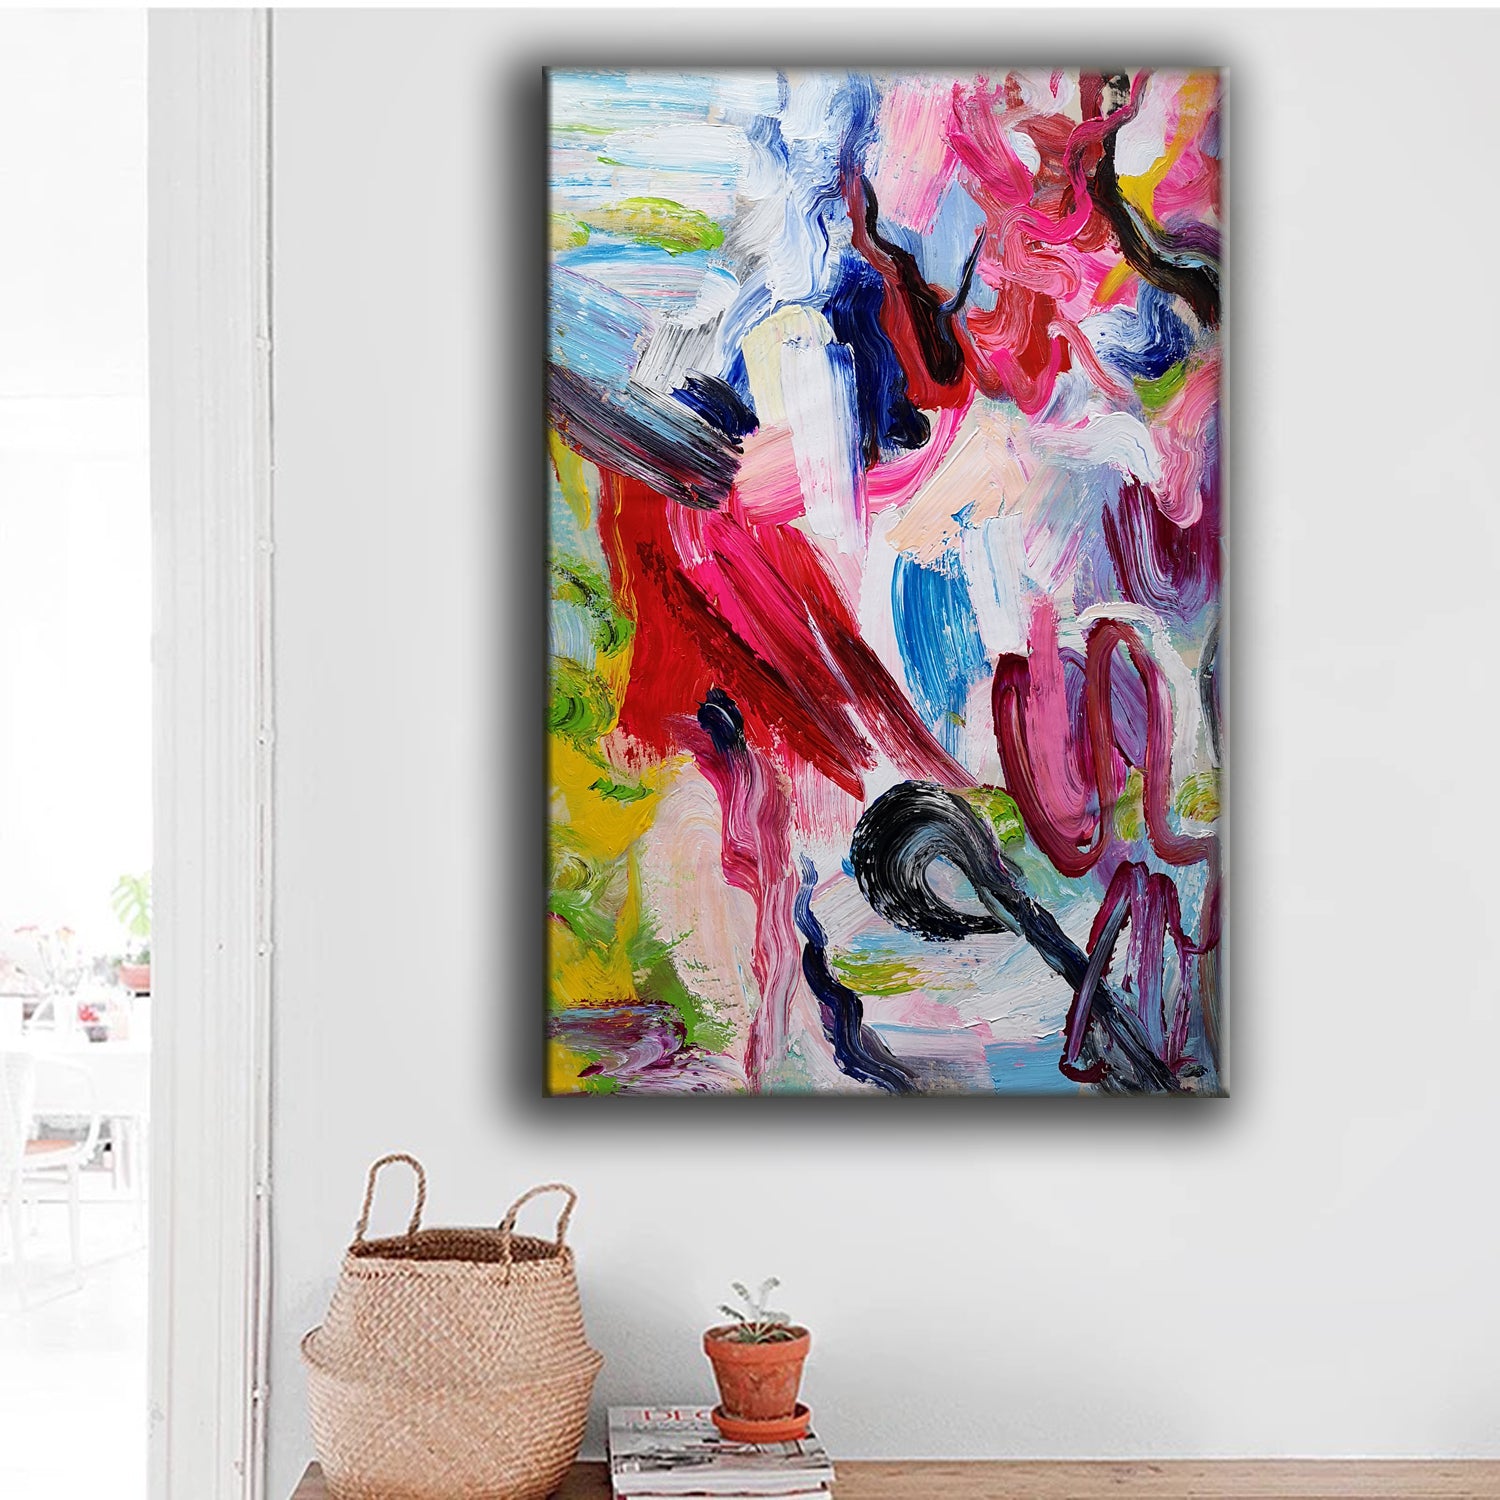  Modern Abstract Painting Original Large Abstract Painting  Abstract Canvas Art Colorful Abstract Art Hand Painted Wall Art Abstract  Orange Abstract Wall Art Extra Large Painting Wall Painting Drawing:  Paintings